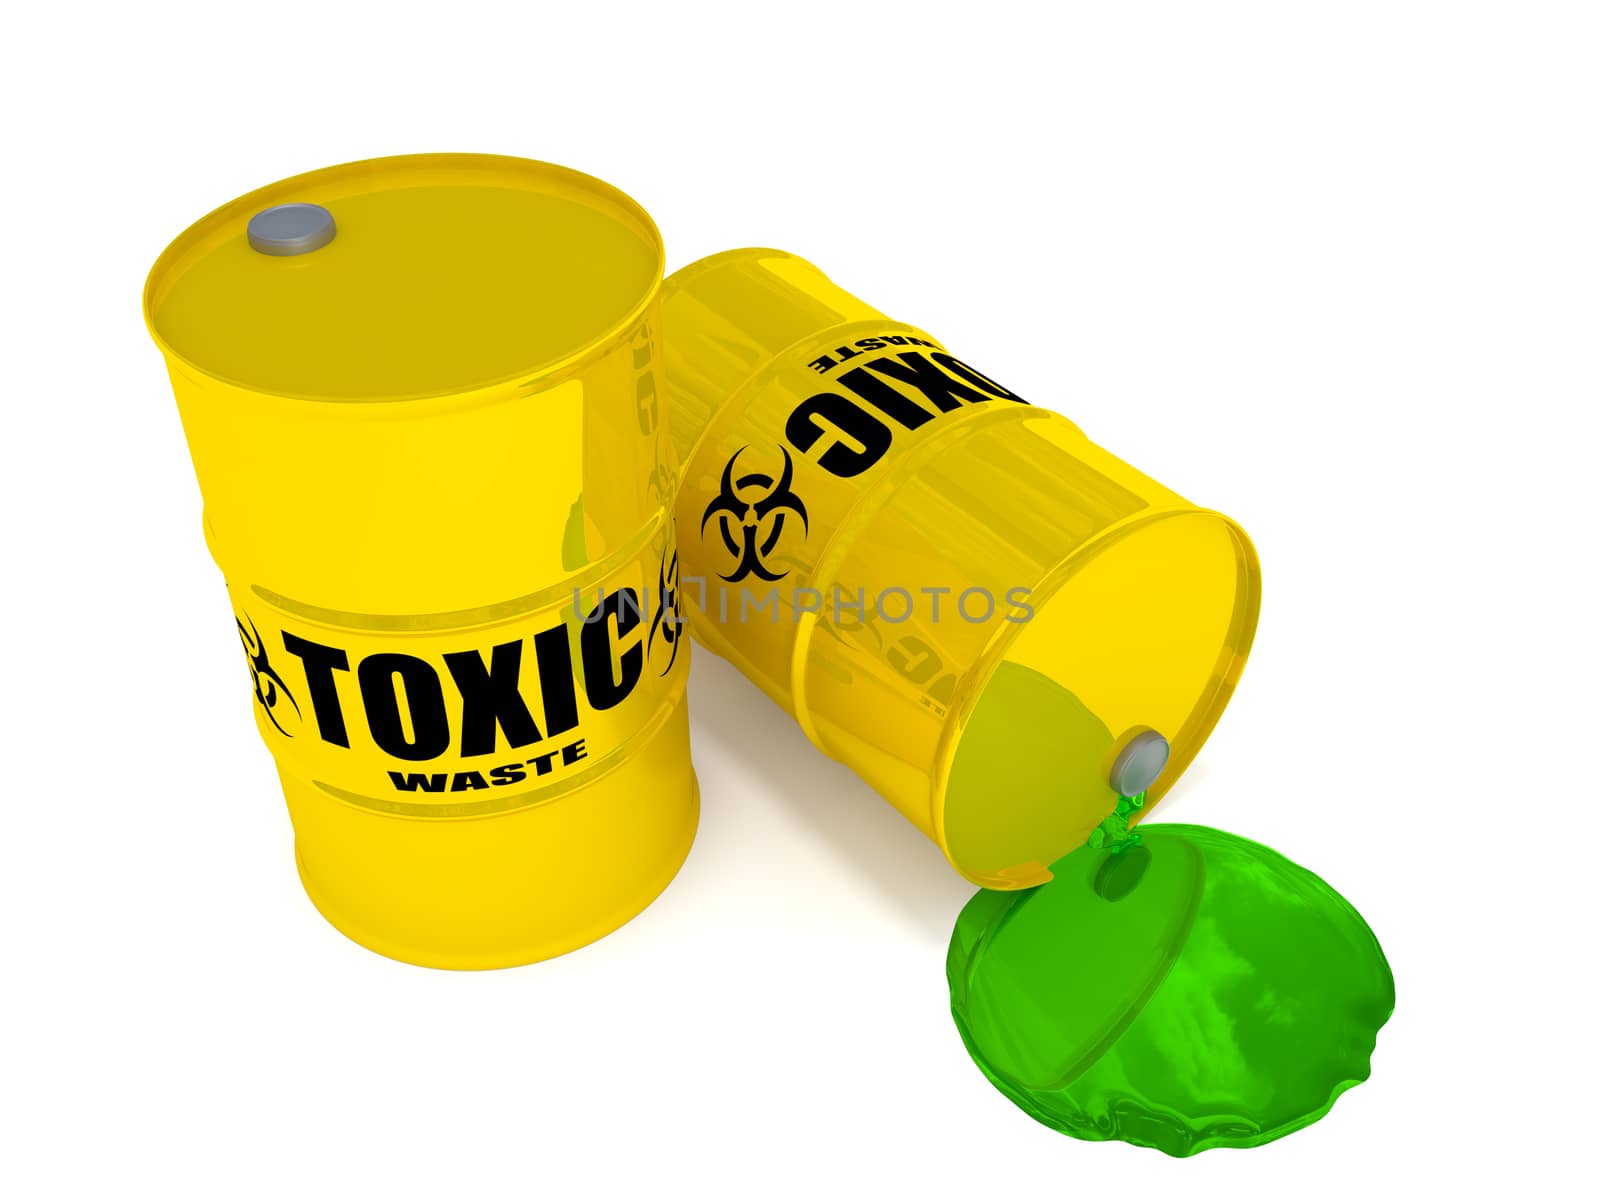 2 drums containing toxic waste.